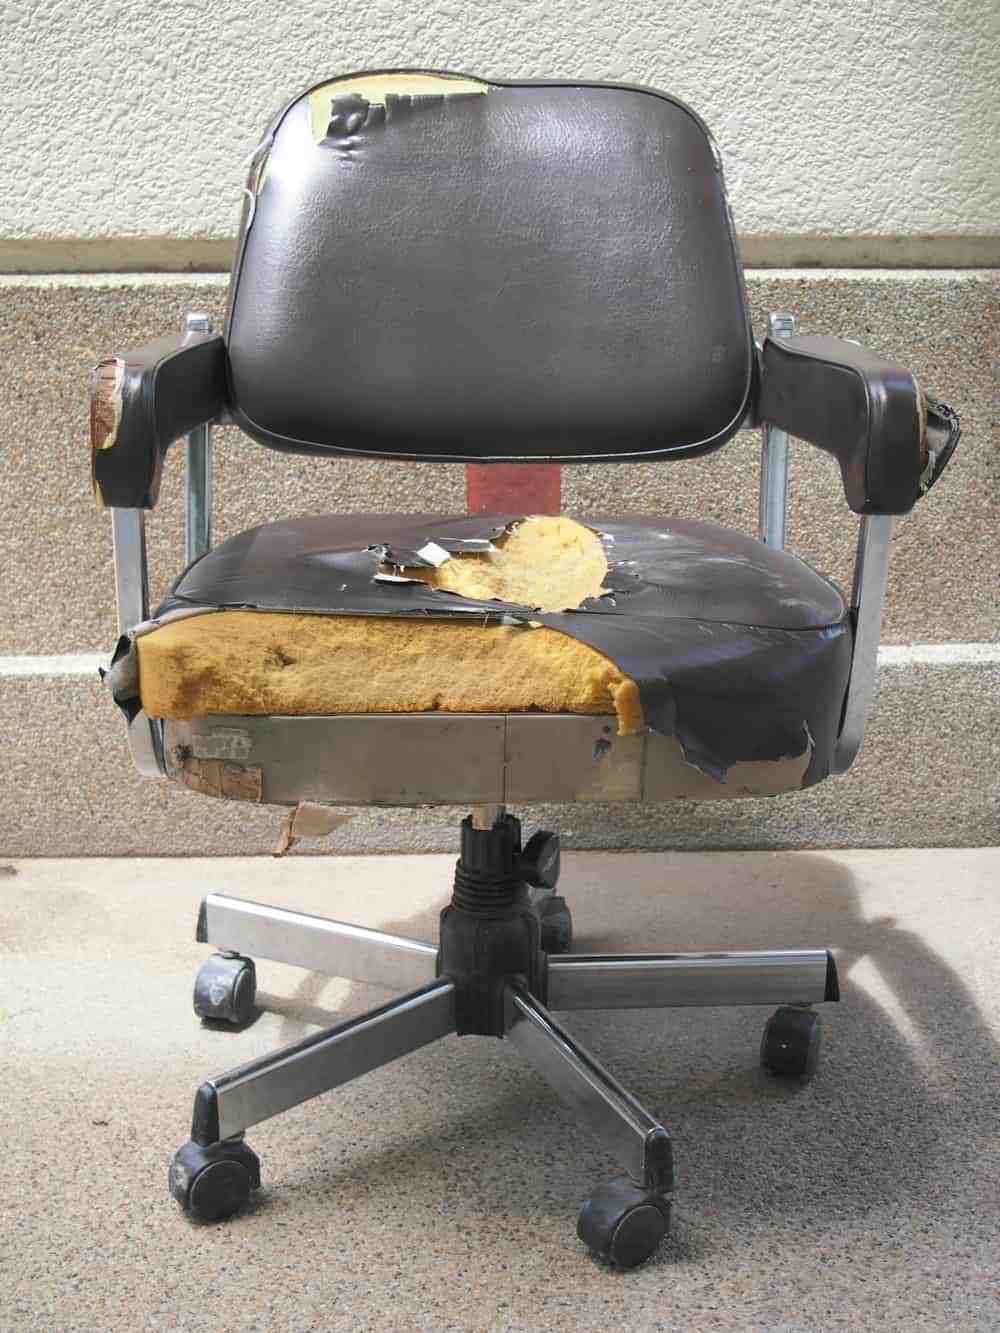 How to Recycle an Old Office Chair? 3 Ways To Consider